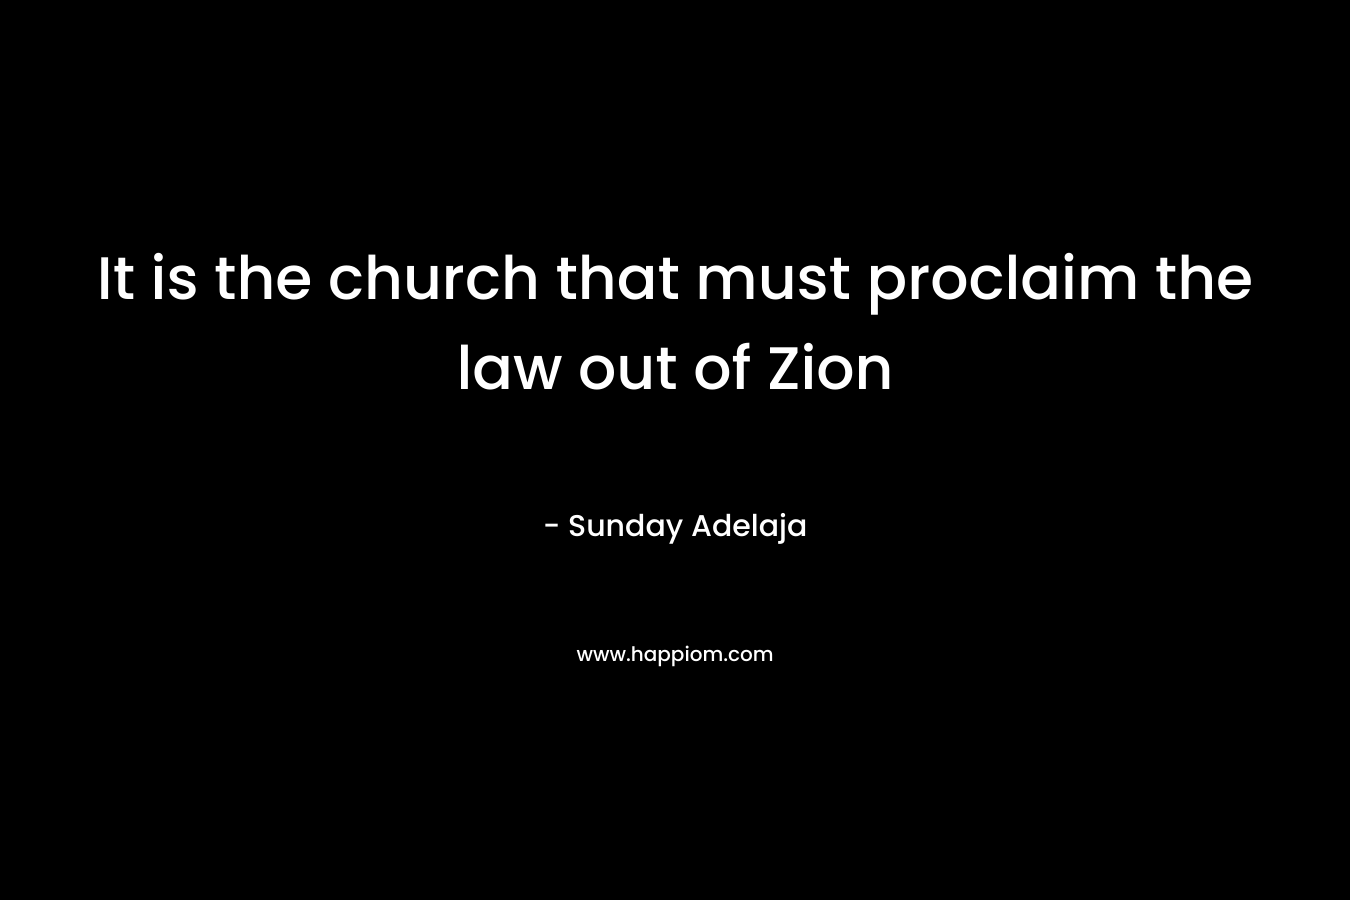 It is the church that must proclaim the law out of Zion